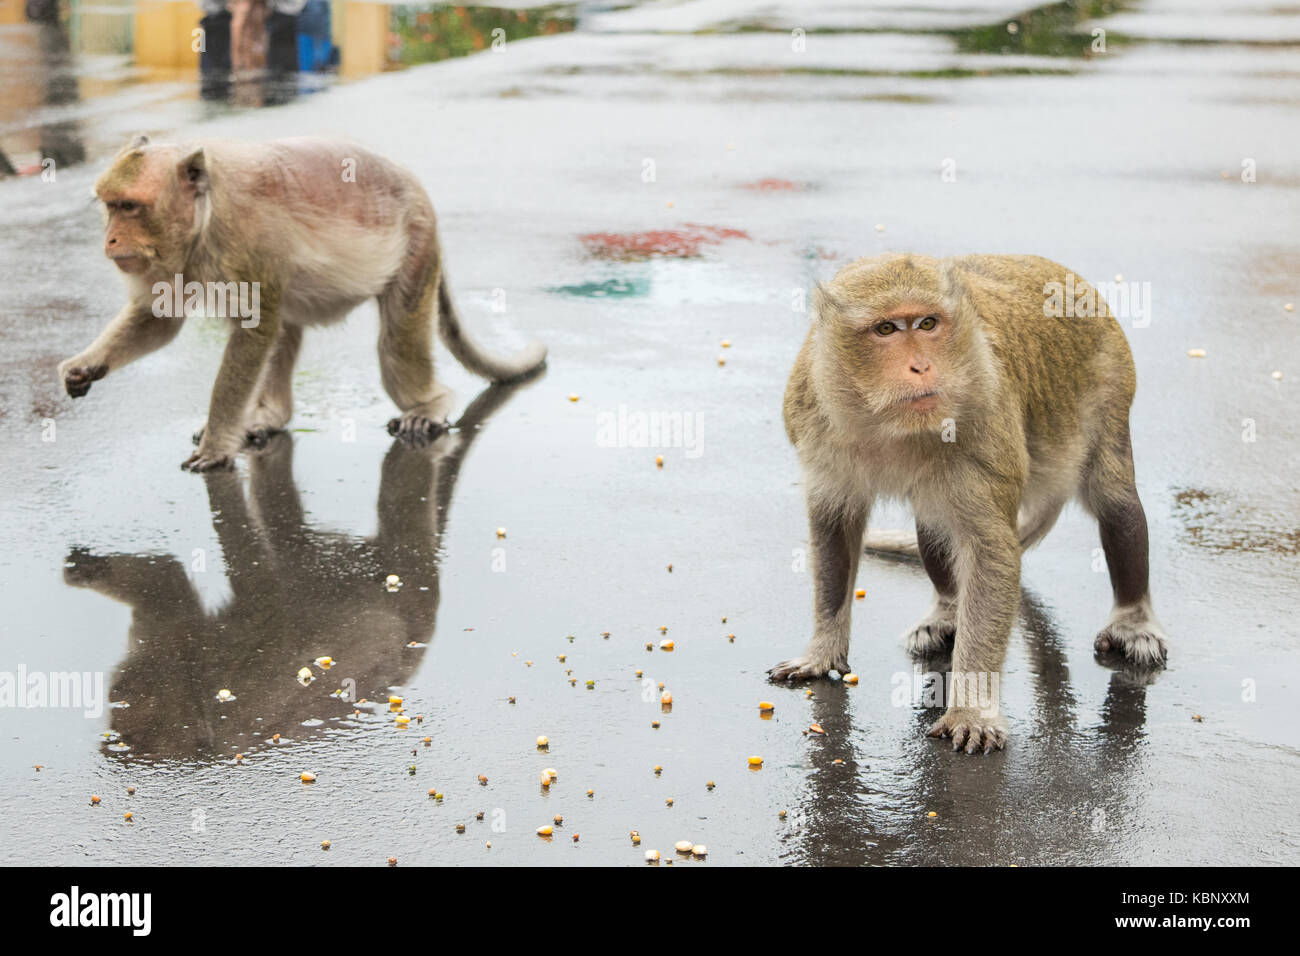 Two Macaque Monkeys, standing on tarmac in an urban environment, eating corn seeds. One monkey has severe fur loss. Phnom Penh city, Cambodia, SE Asia Stock Photo